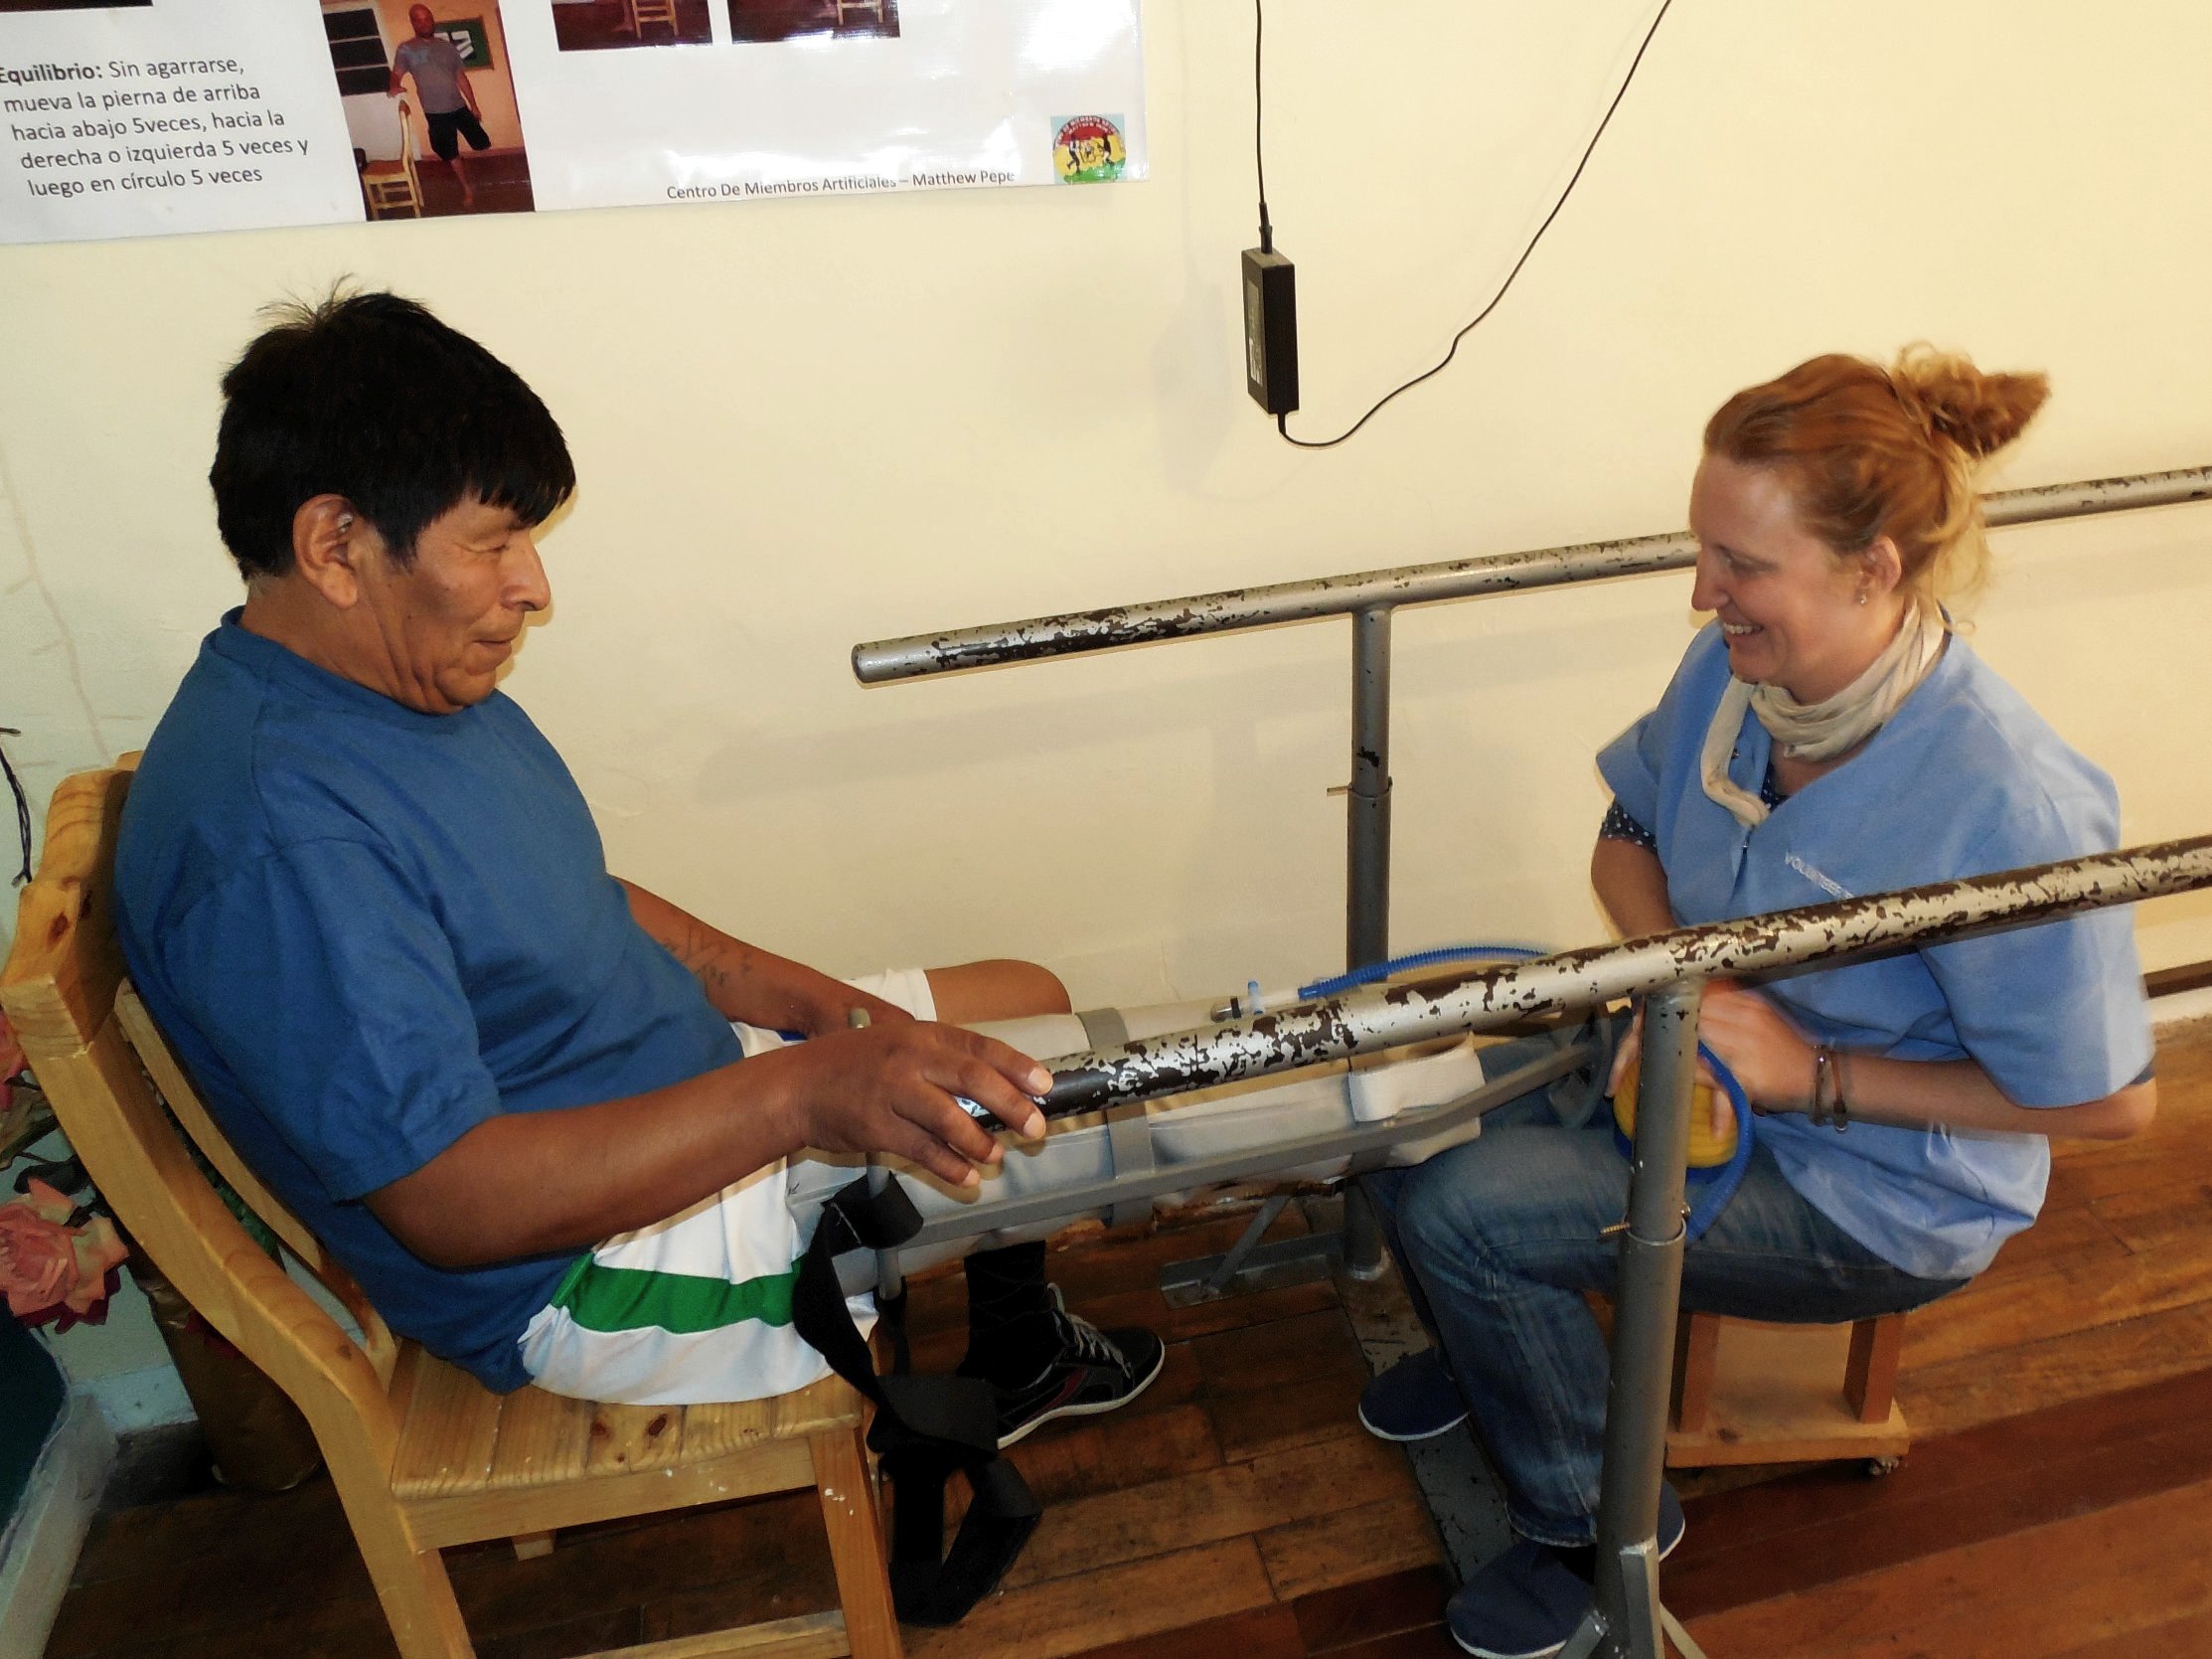 bolivians-without-disabilities-lucas-fitting-ppam-aid-3-b